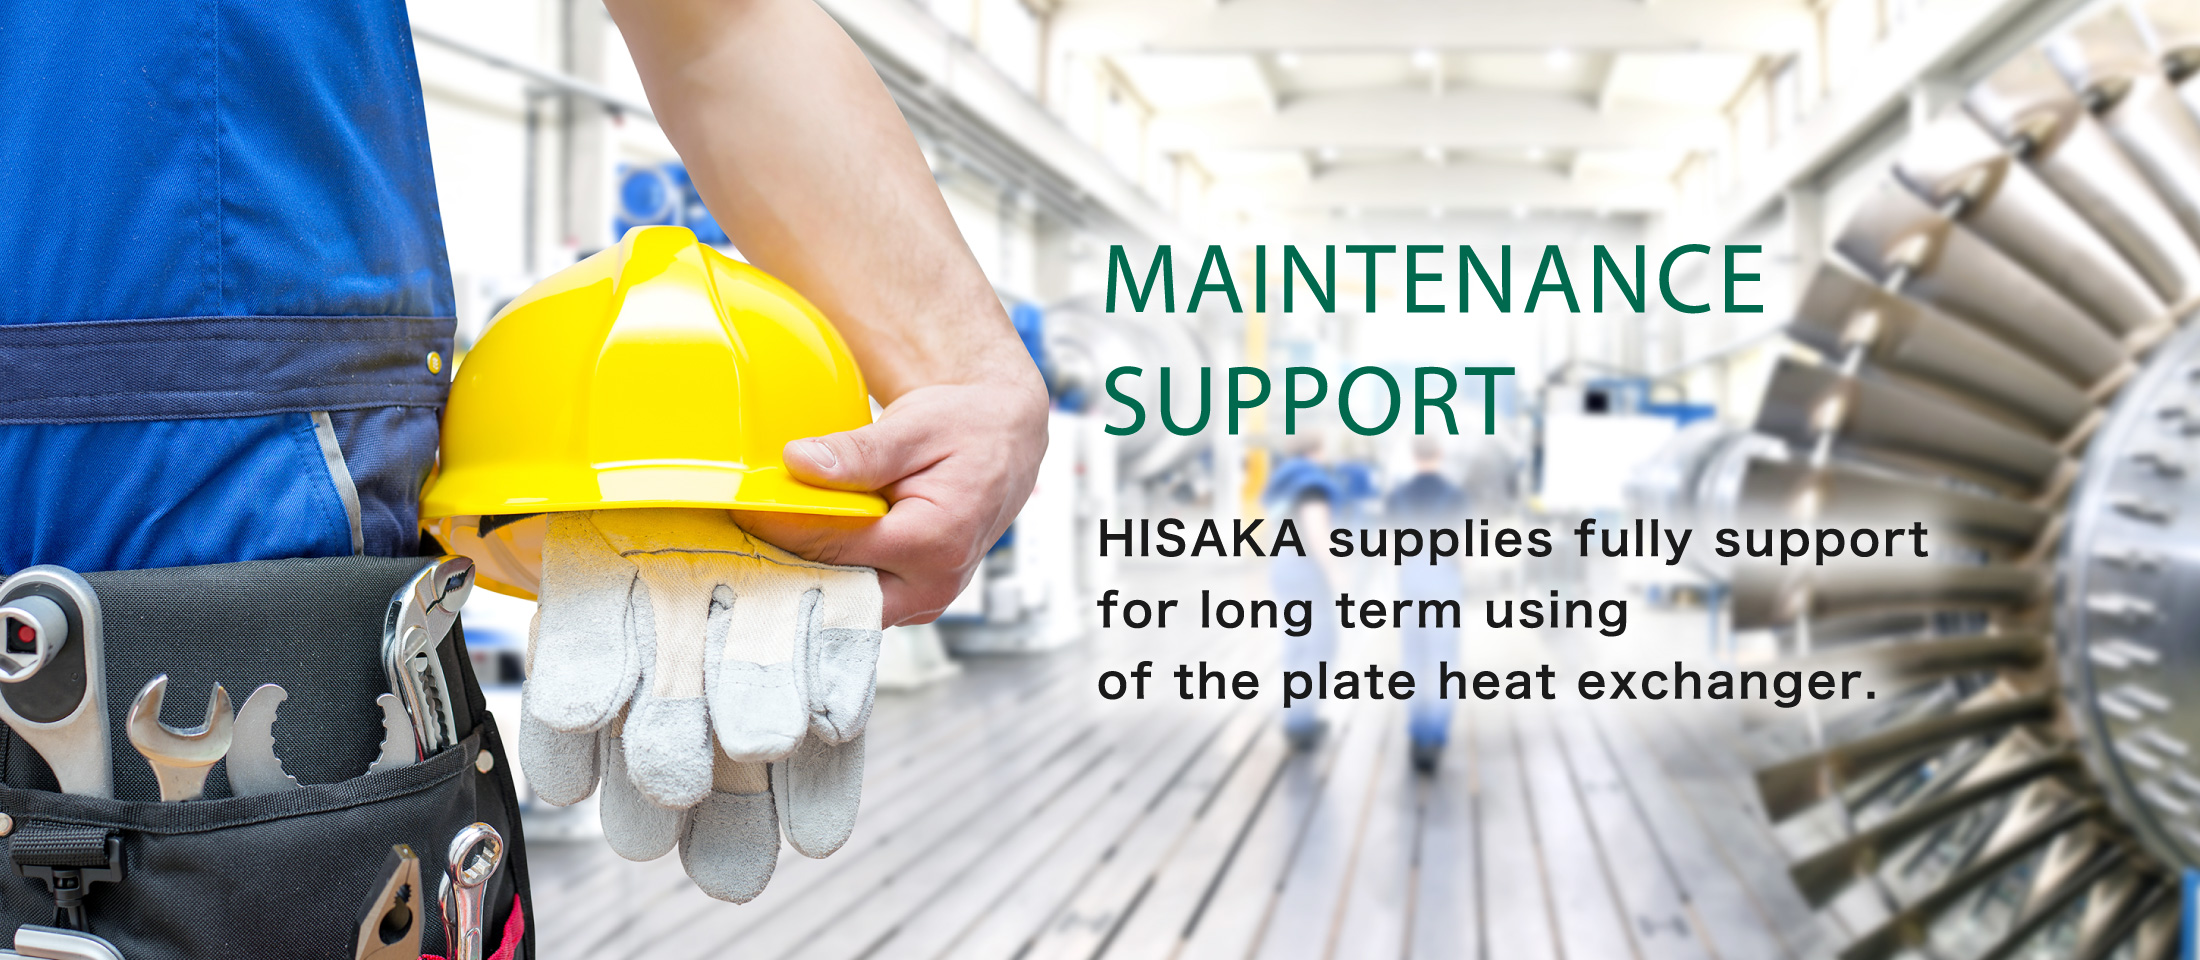 MAINTENANCE SUPPORT HISAKA supplies fully support for long term using of the plate heat exchanger.